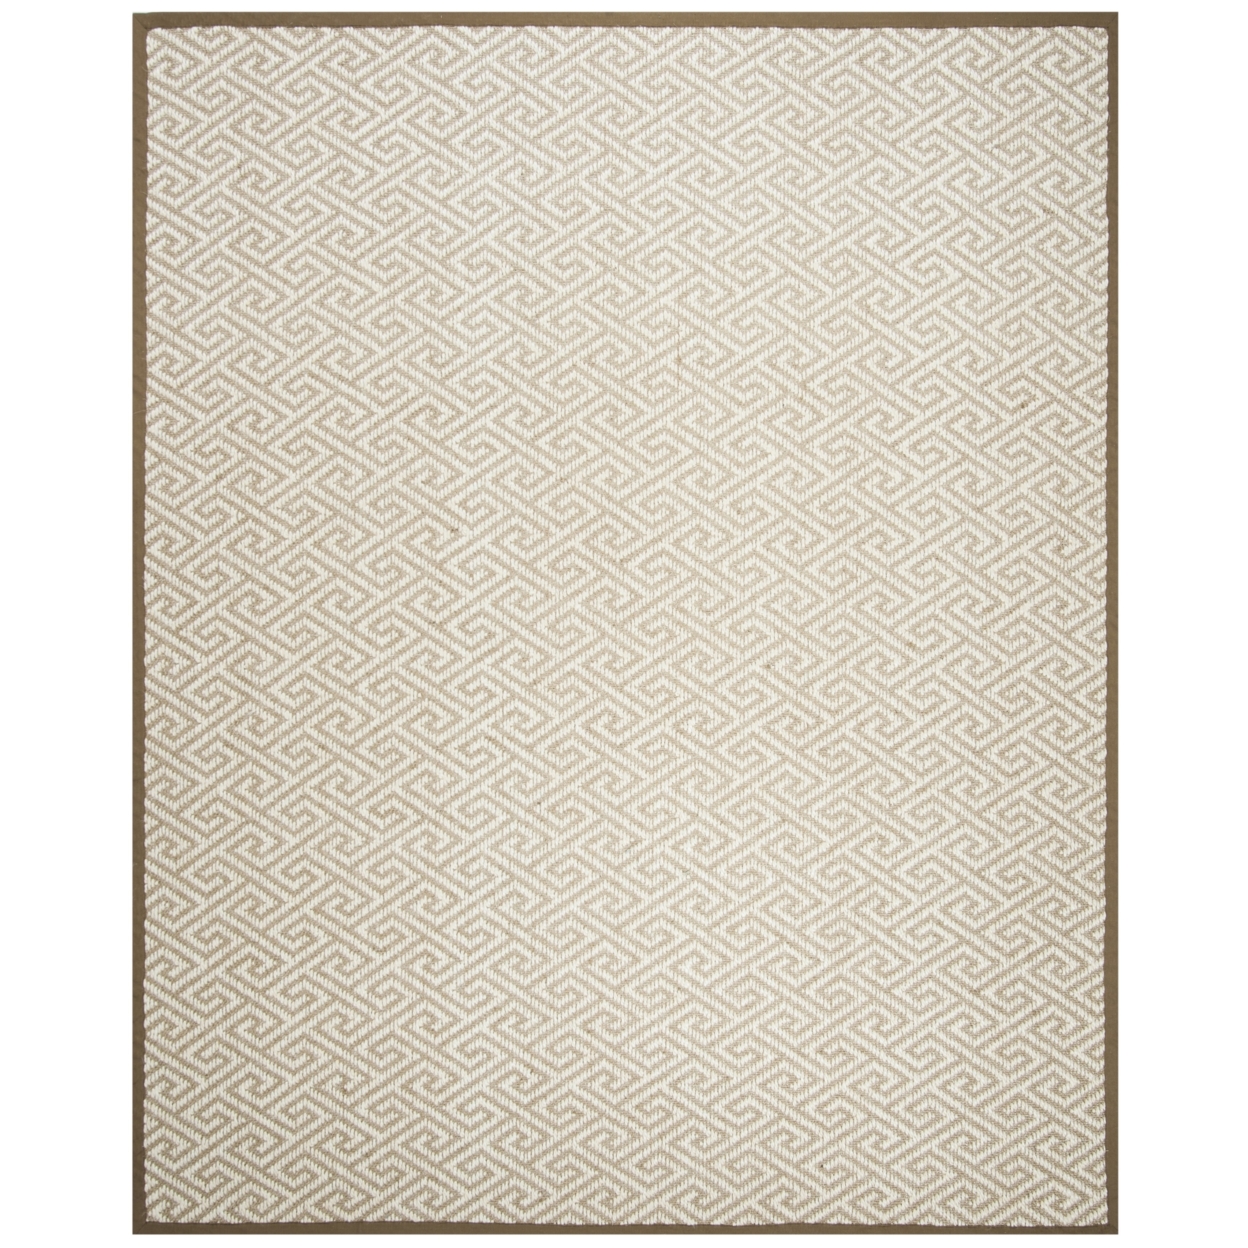 SAFAVIEH Natural Fiber Collection NF462A Natural Rug - 6' Round